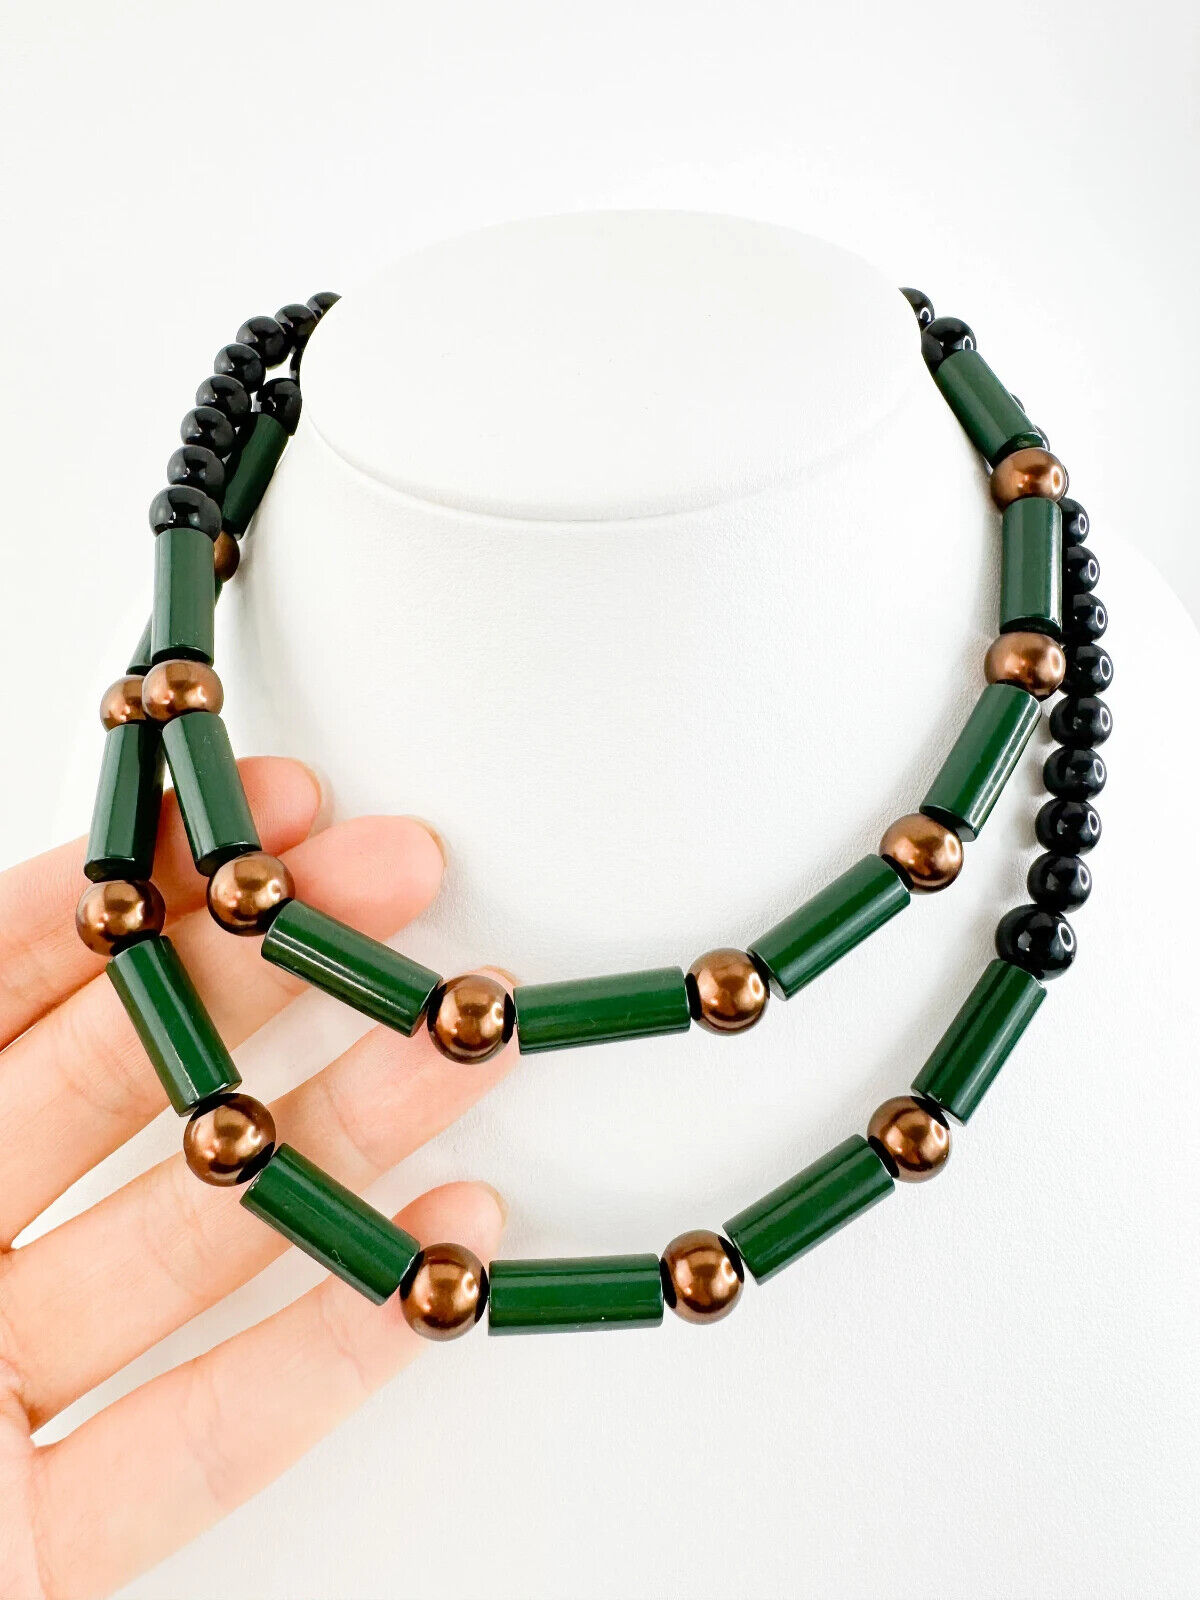 Vintage YSL Yves Saint Laurent Necklace, Beaded Necklace, Emerald Green Long Necklace, Jewelry for Women, Necklace Large, Gift for Mom